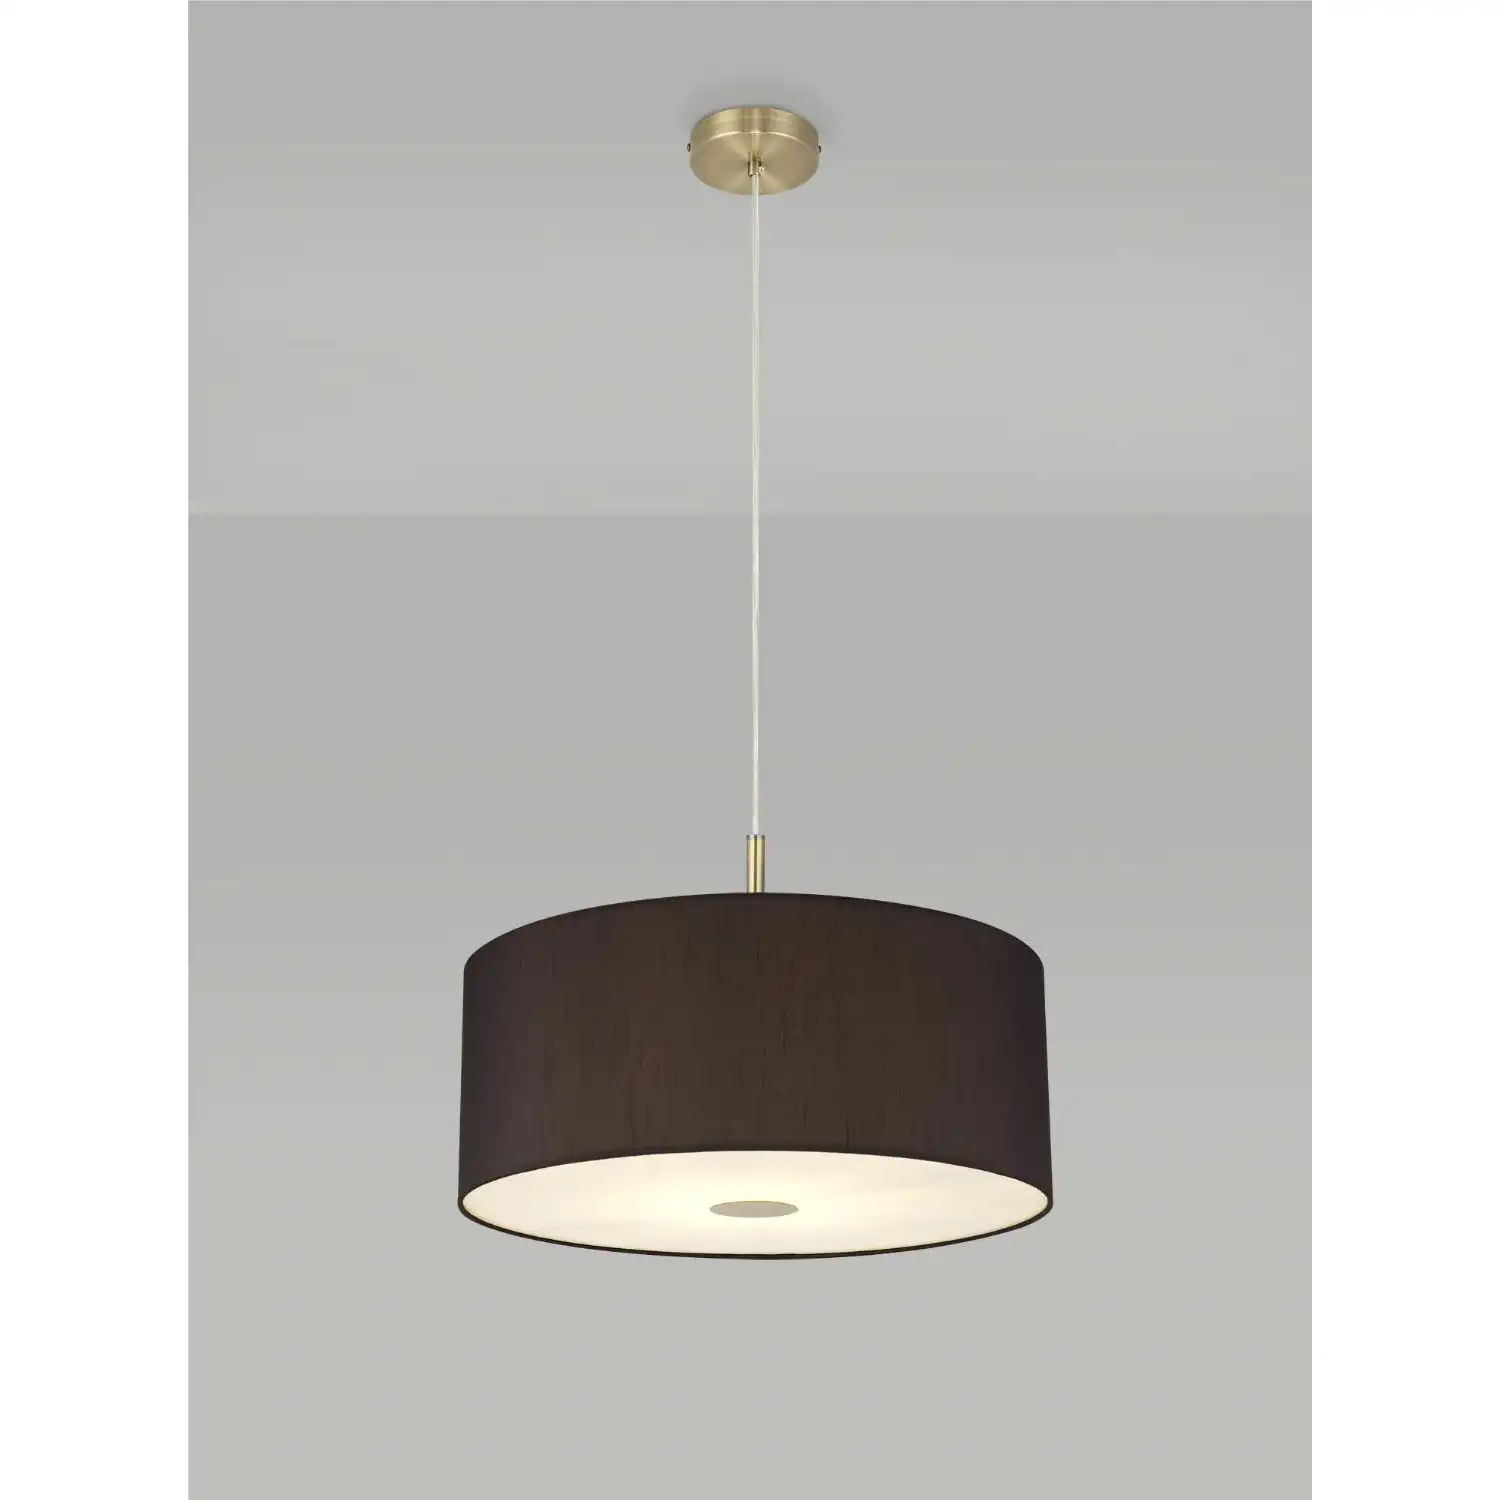 Baymont Antique Brass 1 Light E27 3m Single Pendant c w 500mm Faux Silk Shade, Black White Laminate c w 500mm Frosted AB Acrylic Diffuser